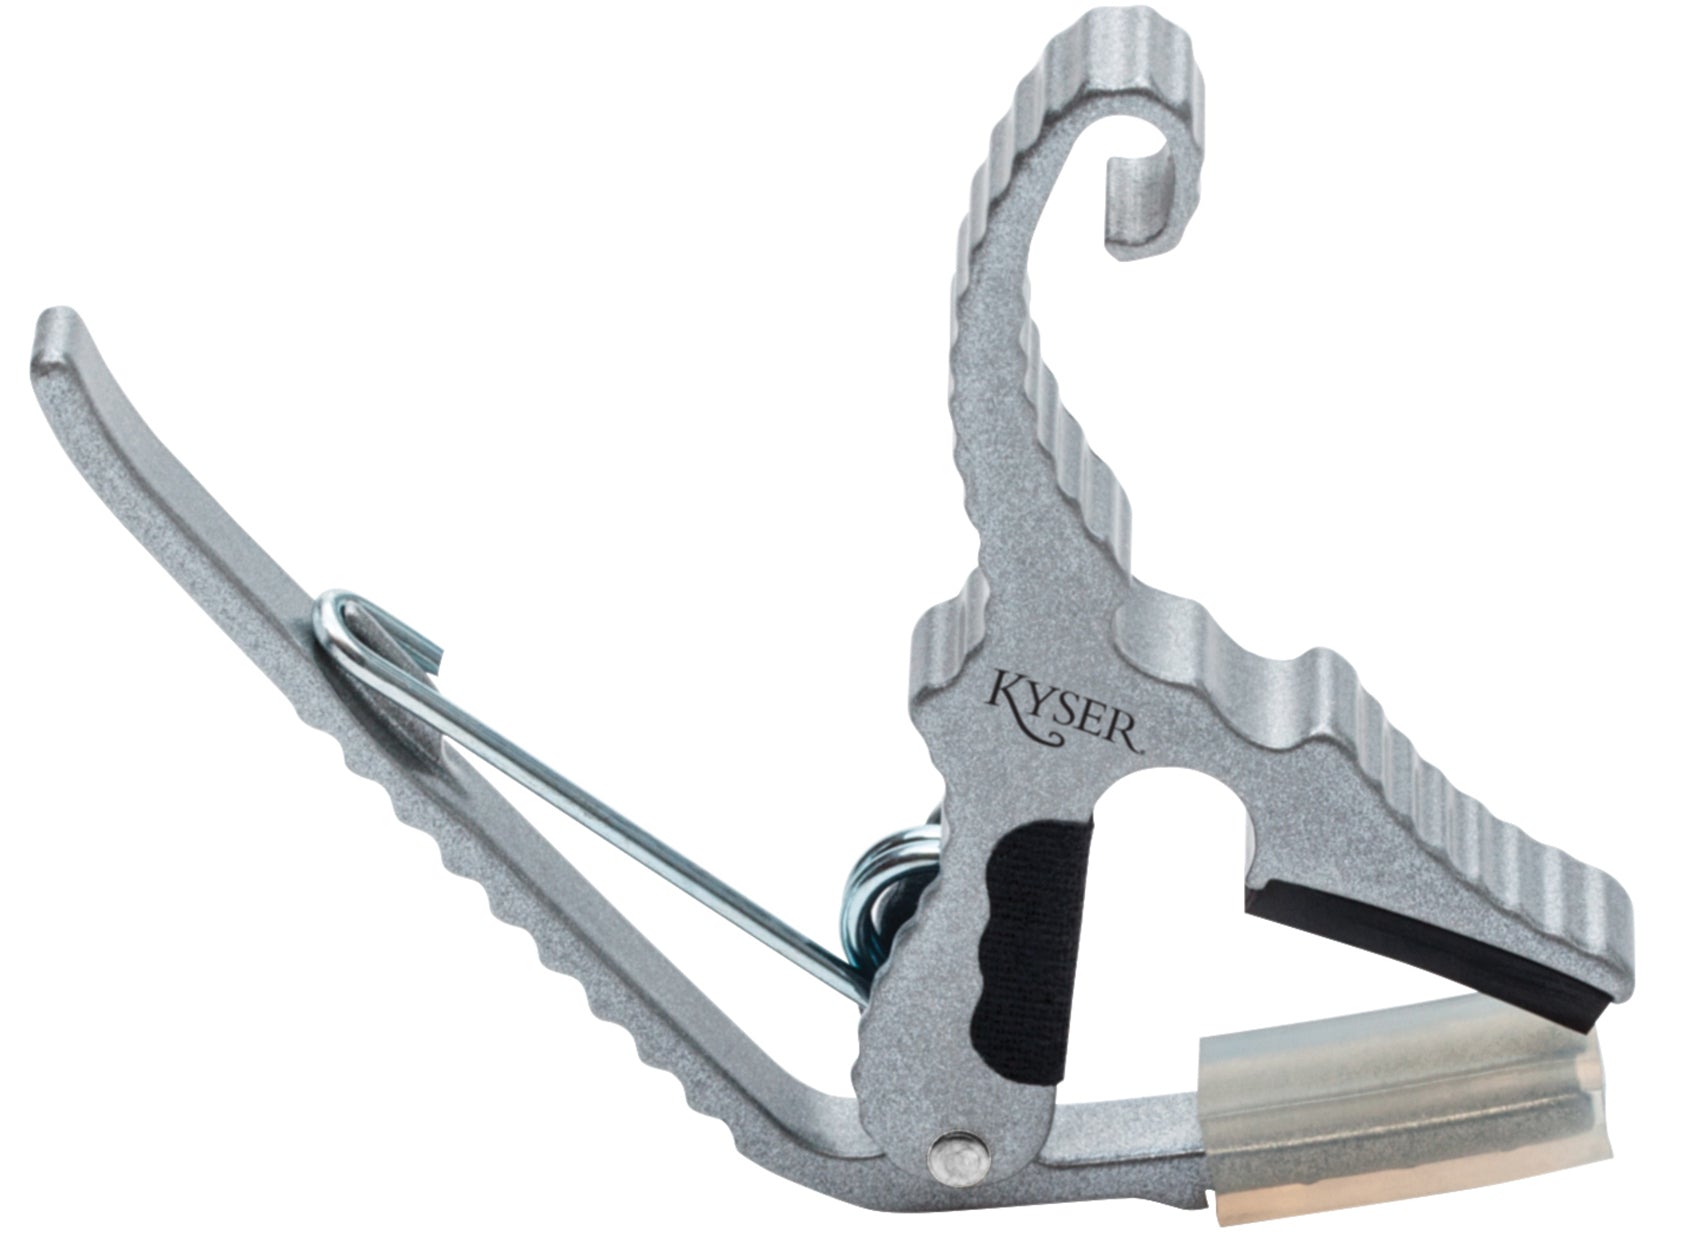 Silver Partial Capo for acoustic guitars. Easy headstock park and one hand reposition.